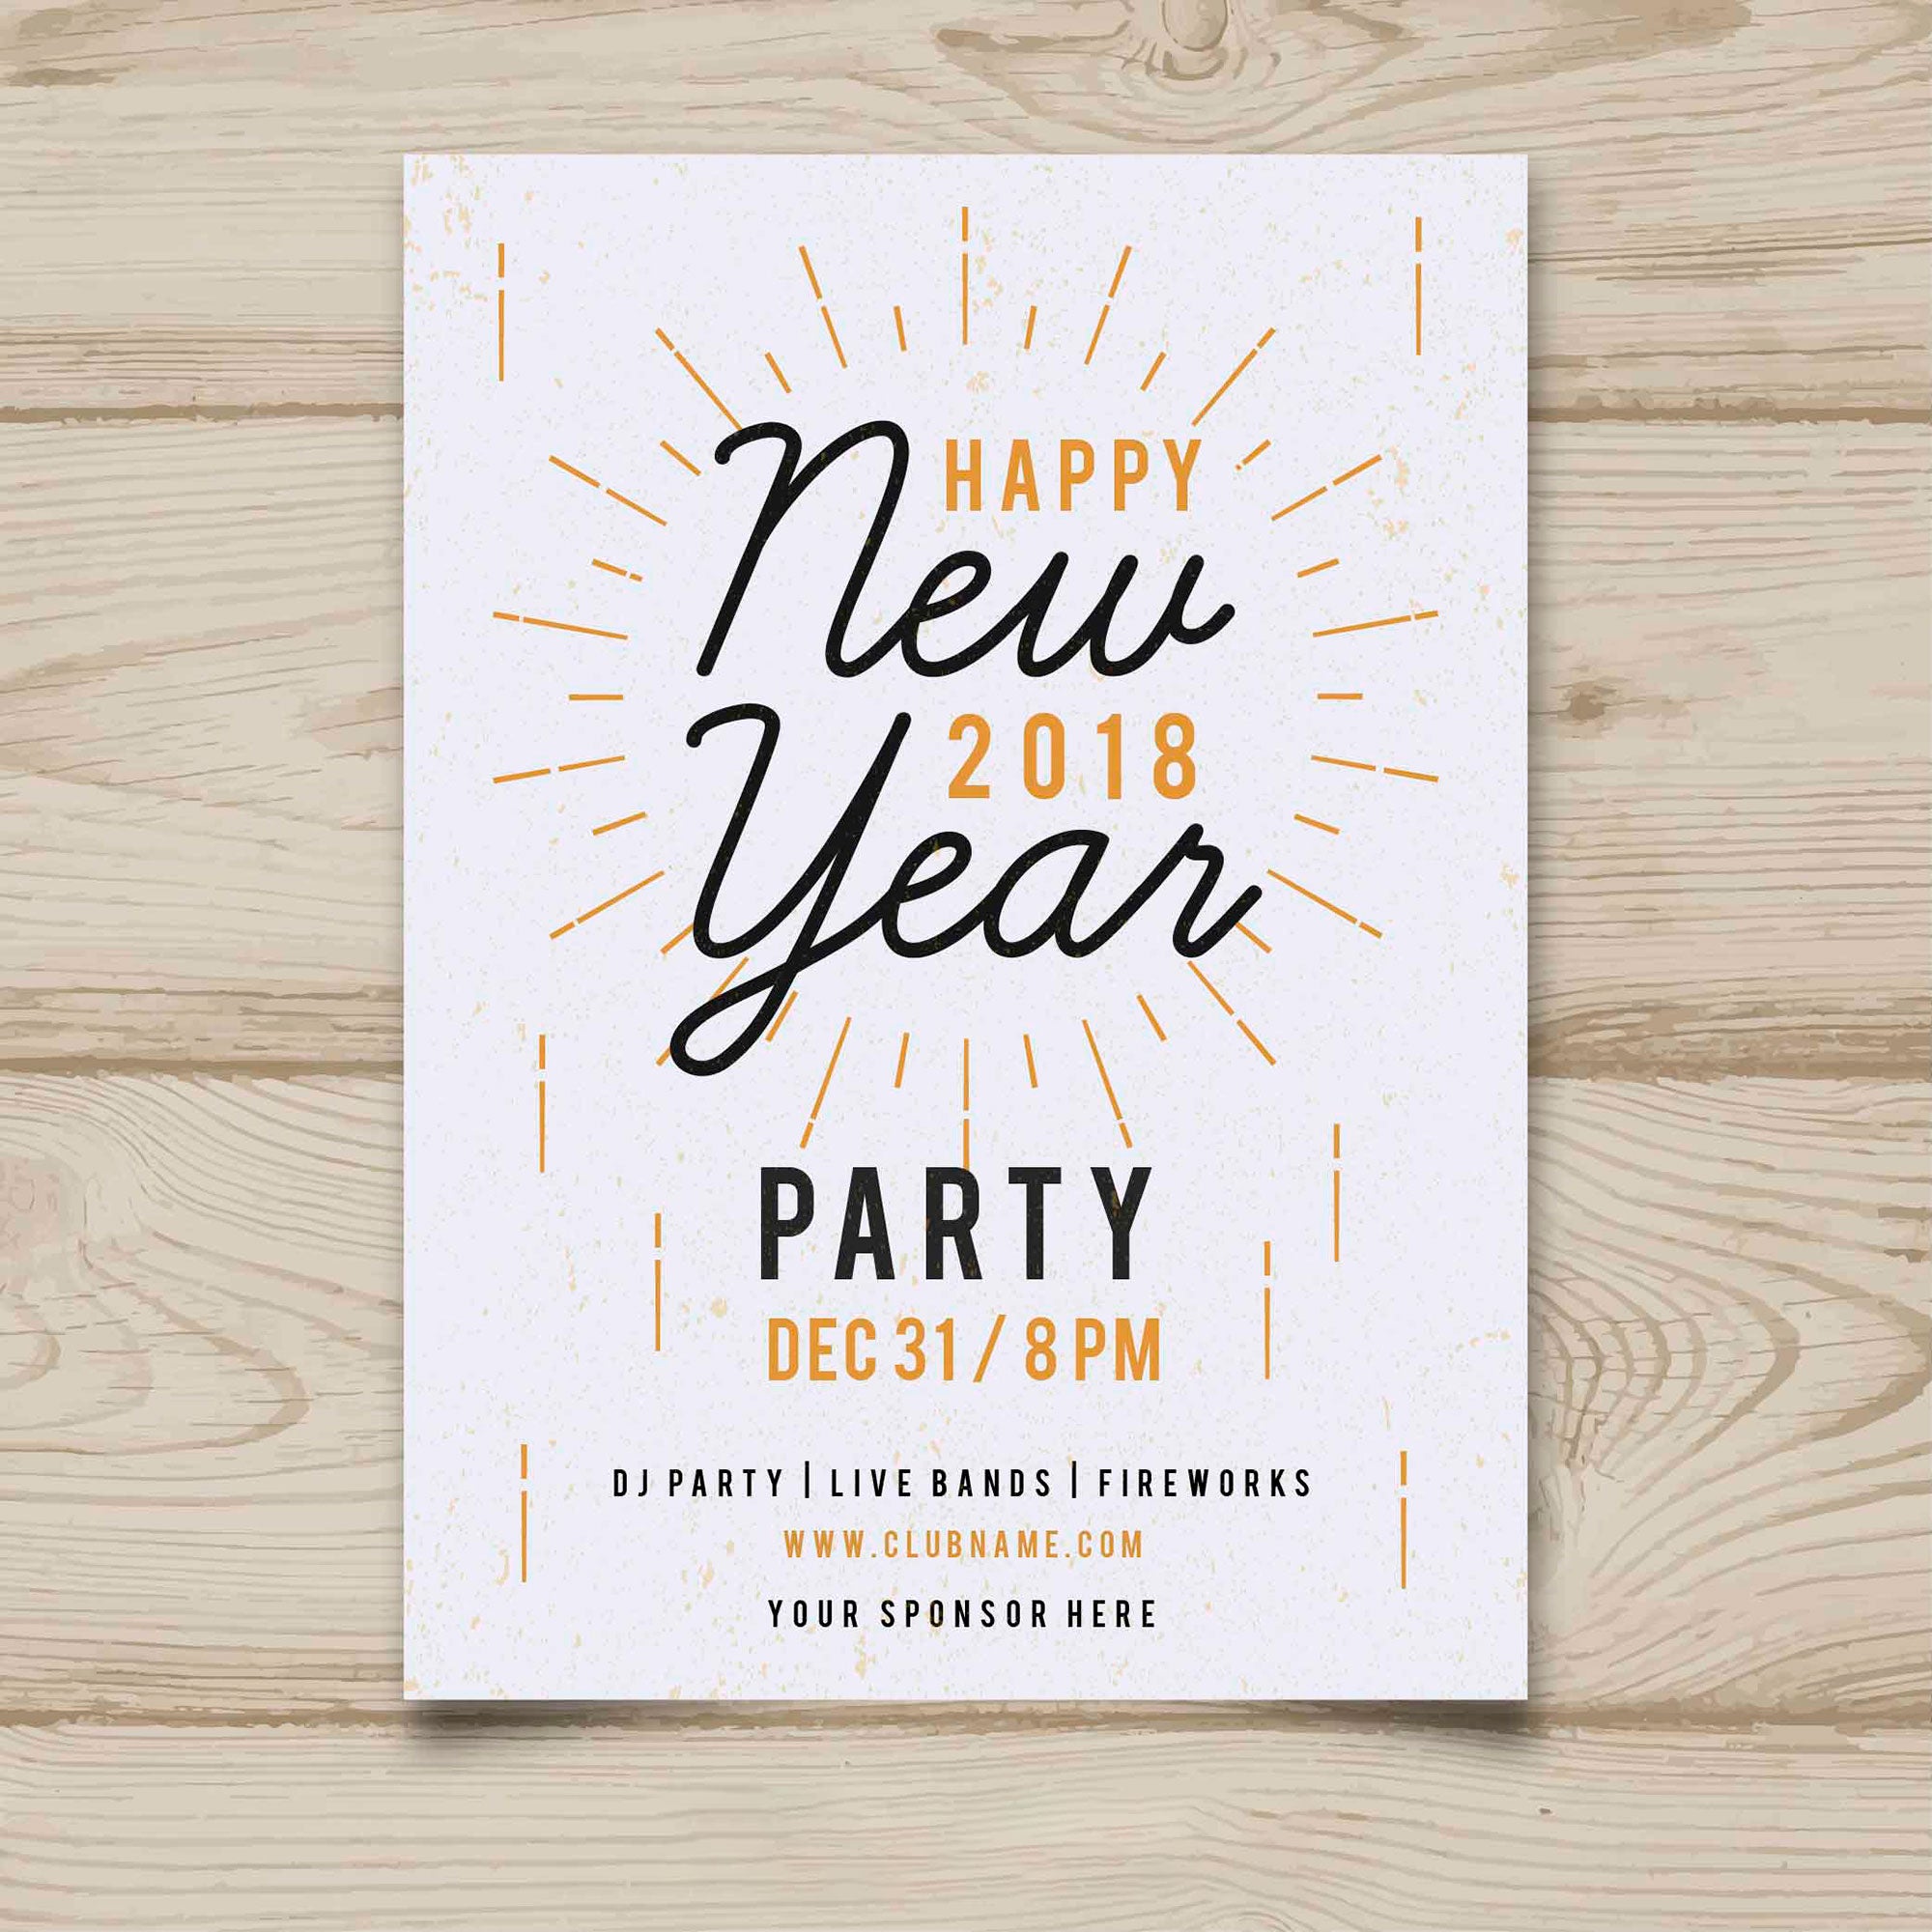 Plantable Minimalistic New Year Eco Greetings & Party Invitations